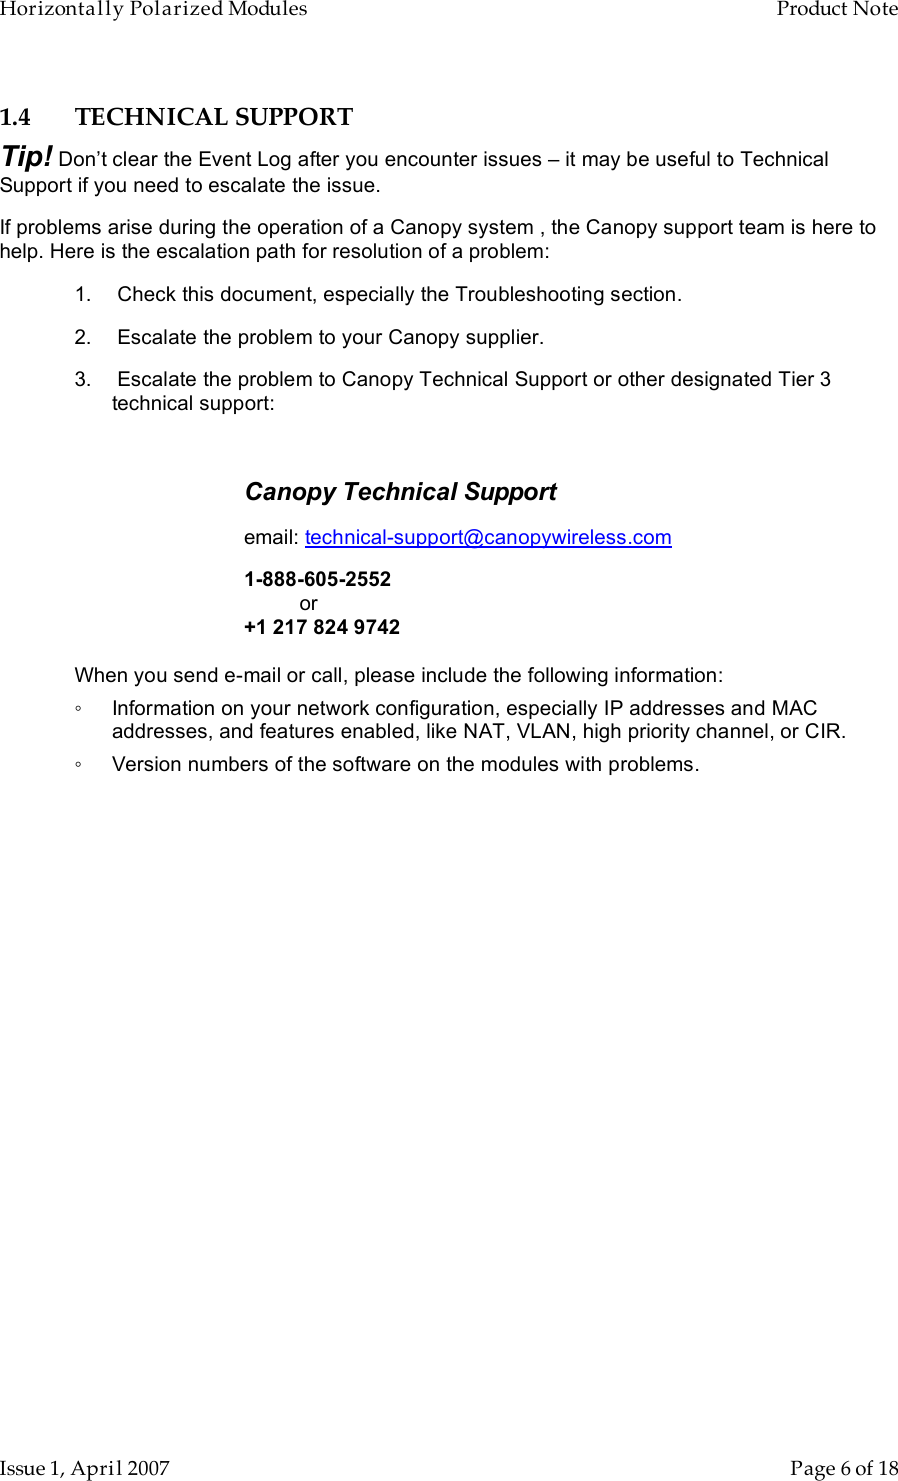 Horizontally Polarized Modules    Product Note   Issue 1, April 2007      Page 6 of 18 1.4 TECHNICAL SUPPORT Tip! Don’t clear the Event Log after you encounter issues – it may be useful to Technical Support if you need to escalate the issue. If problems arise during the operation of a Canopy system , the Canopy support team is here to help. Here is the escalation path for resolution of a problem: 1.   Check this document, especially the Troubleshooting section. 2.   Escalate the problem to your Canopy supplier. 3.   Escalate the problem to Canopy Technical Support or other designated Tier 3 technical support:  Canopy Technical Support   email: technical-support@canopywireless.com 1-888-605-2552     or +1 217 824 9742  When you send e-mail or call, please include the following information: ◦  Information on your network configuration, especially IP addresses and MAC addresses, and features enabled, like NAT, VLAN, high priority channel, or CIR. ◦  Version numbers of the software on the modules with problems. 